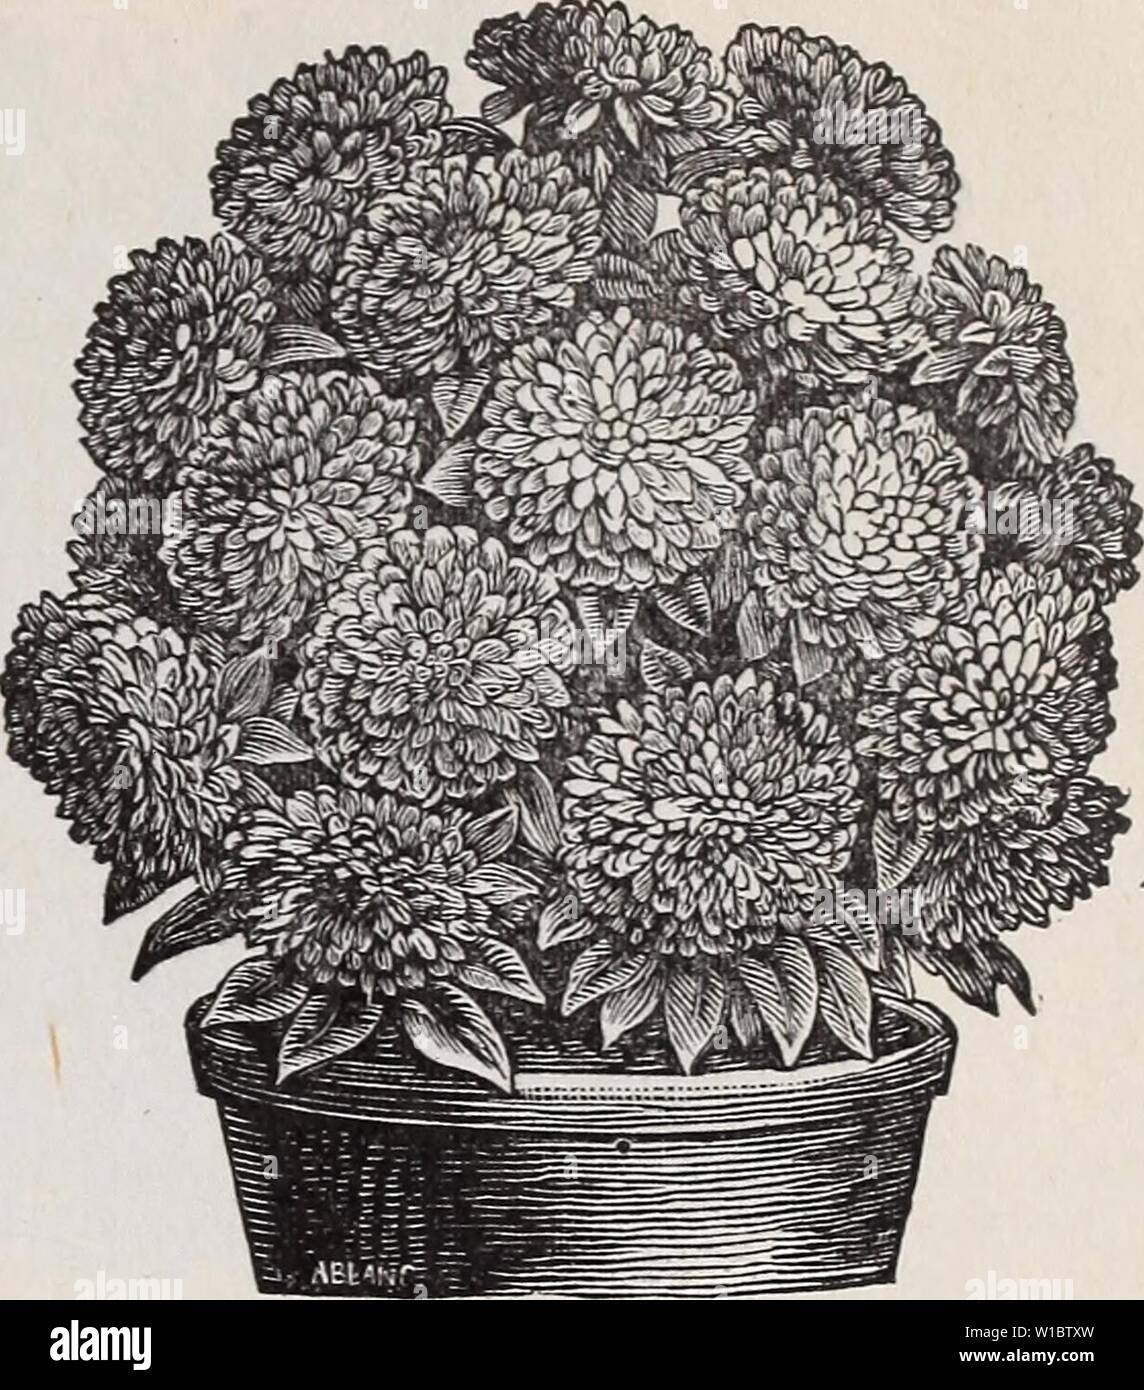 Archive image from page 46 of Descriptive catalogue of vegetable, flower,. Descriptive catalogue of vegetable, flower, and farm seeds : bulbs, roots, plants, tools . descriptivecatal1894weeb Year: 1894  DWAEF CHKTSAKTHEMUM-rLOWERED ASTER. ARfEBIA CORXUTA—Arabian Primrose. PER PKT. The blossoms are of a brilliant yellow color with five large black epots. The latter change into a coffee-brown shade on the second day, and disappear altogether on the third day of its bloom, so that pure yellow and spotted flowers are on the same flowering branch. H. A.,2ft 25 ASPARAGUS PLUMOSUS NAIA. Graceful and Stock Photo